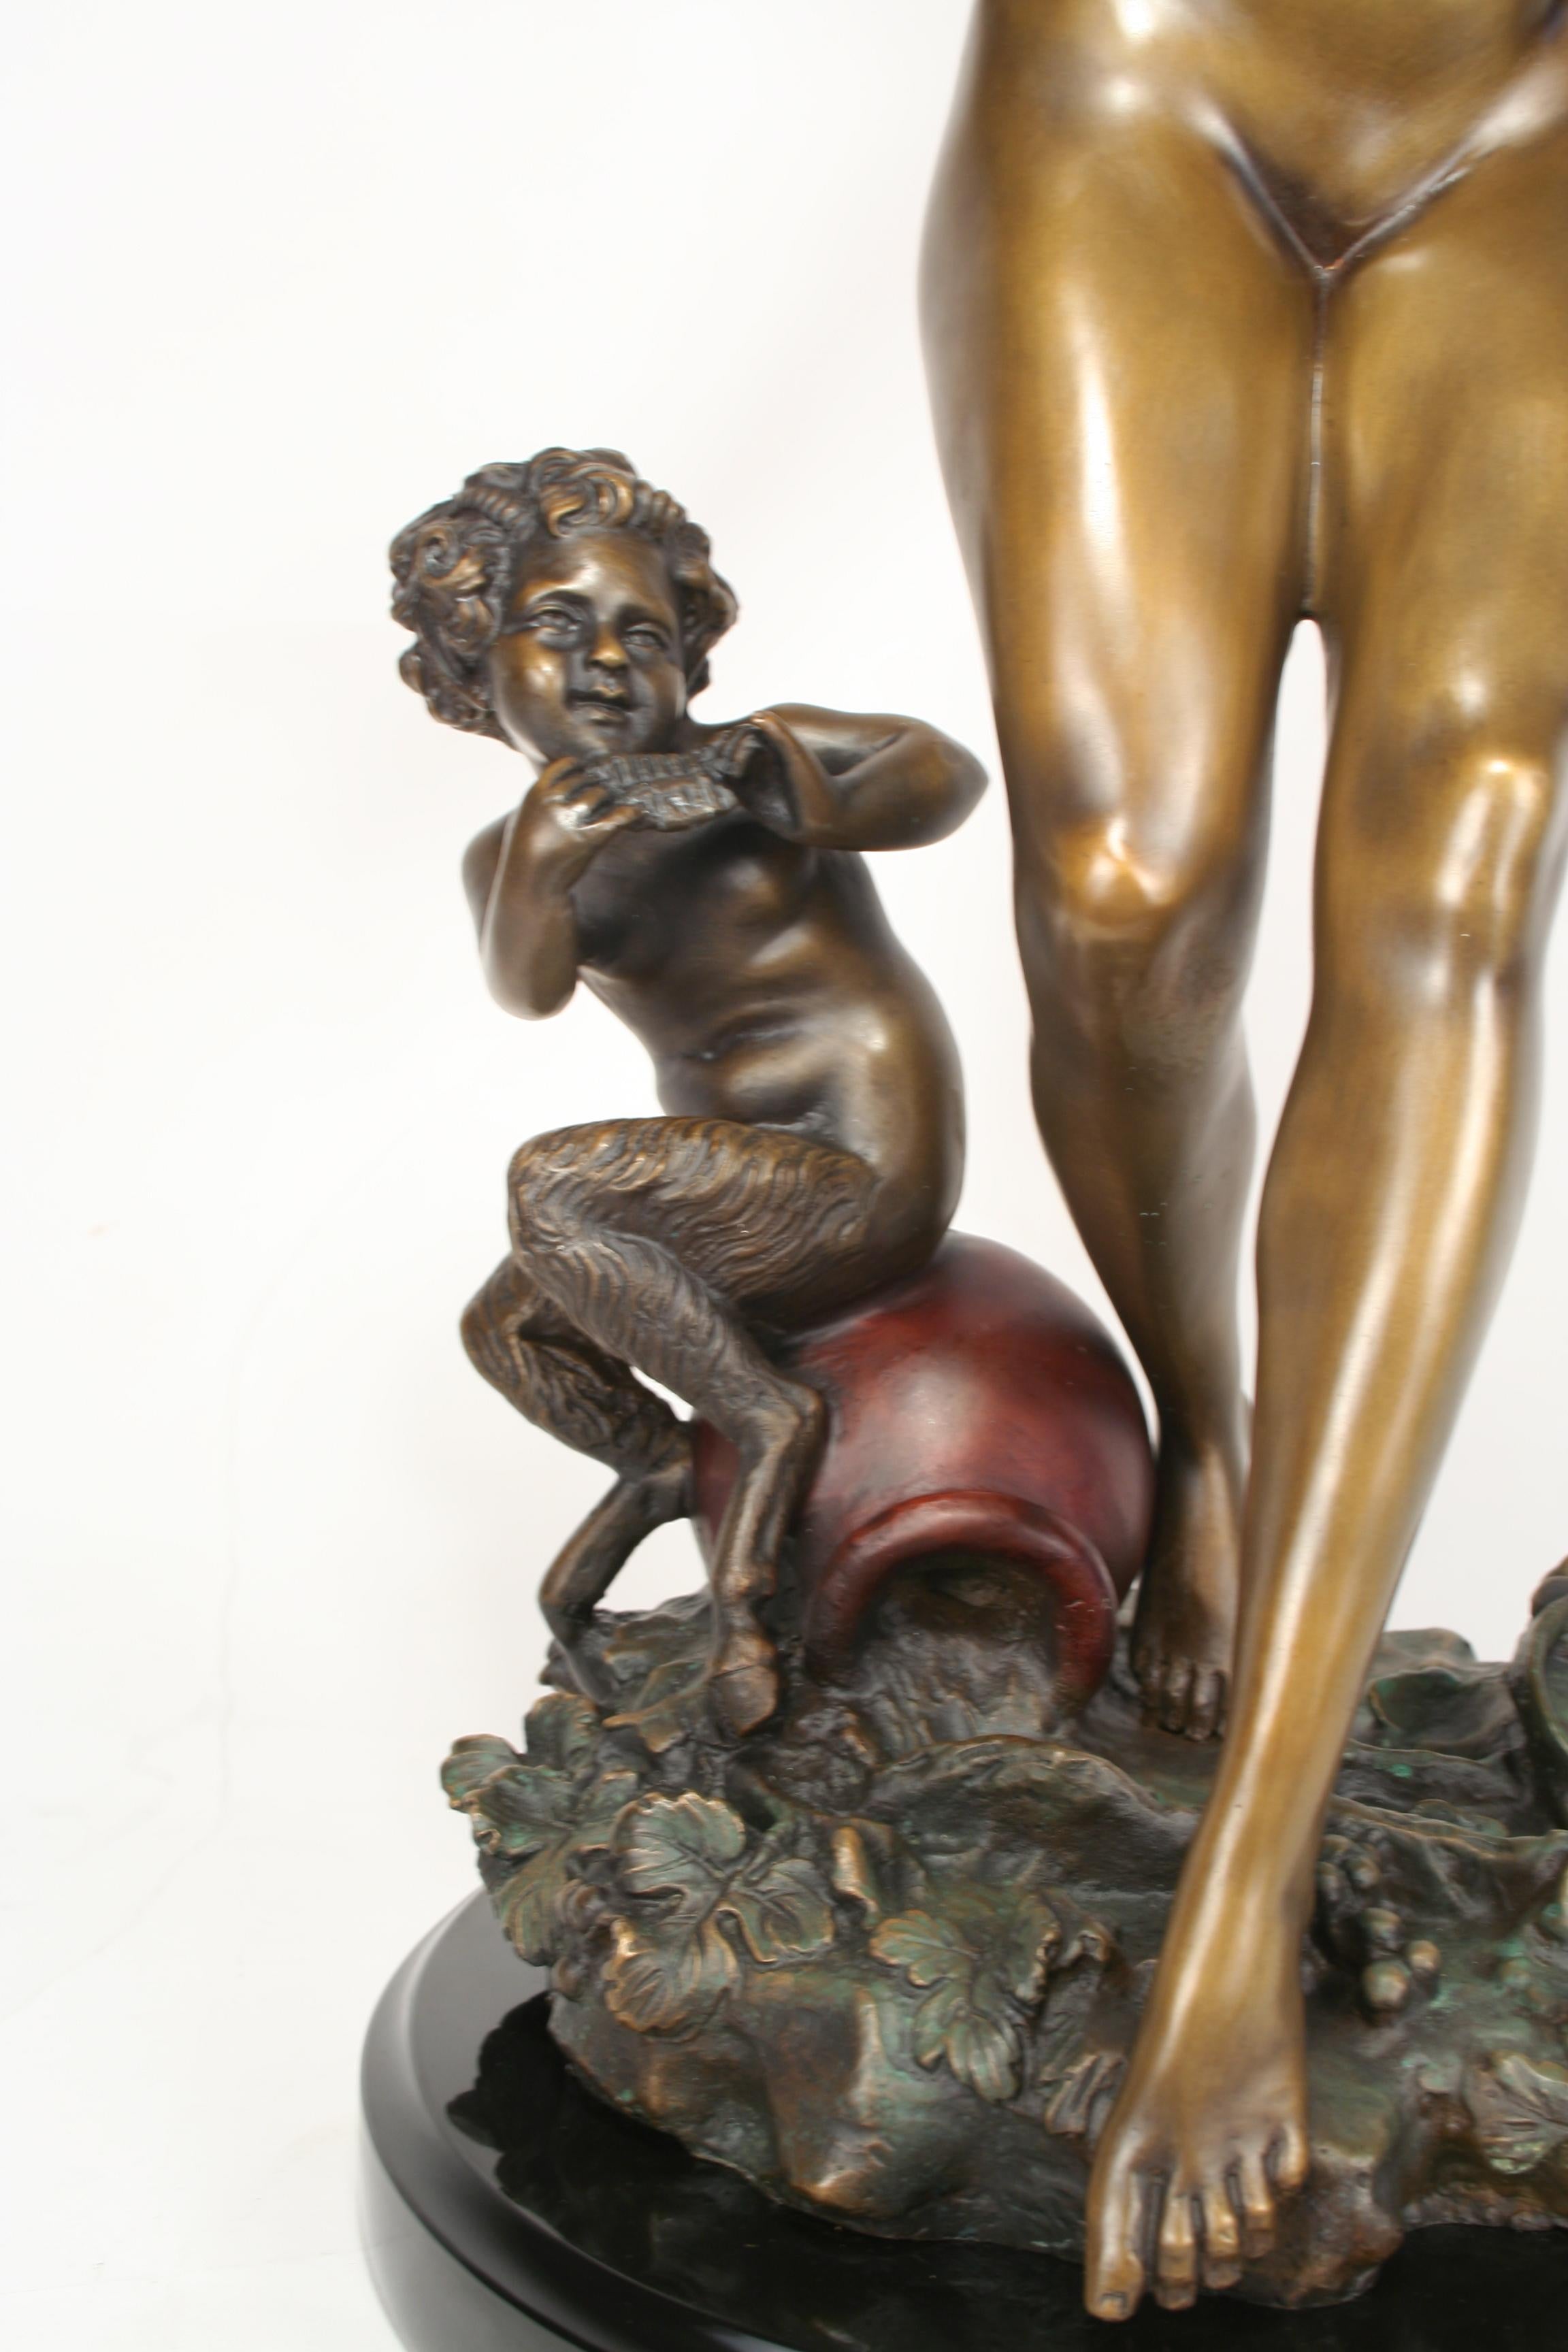 Good size sculpture with fine details cast in Bronze with multi- patina finish contemporary casting mounted on an absolute Black marble base. Shows a signature on the bottom casting. This item is good size at 24